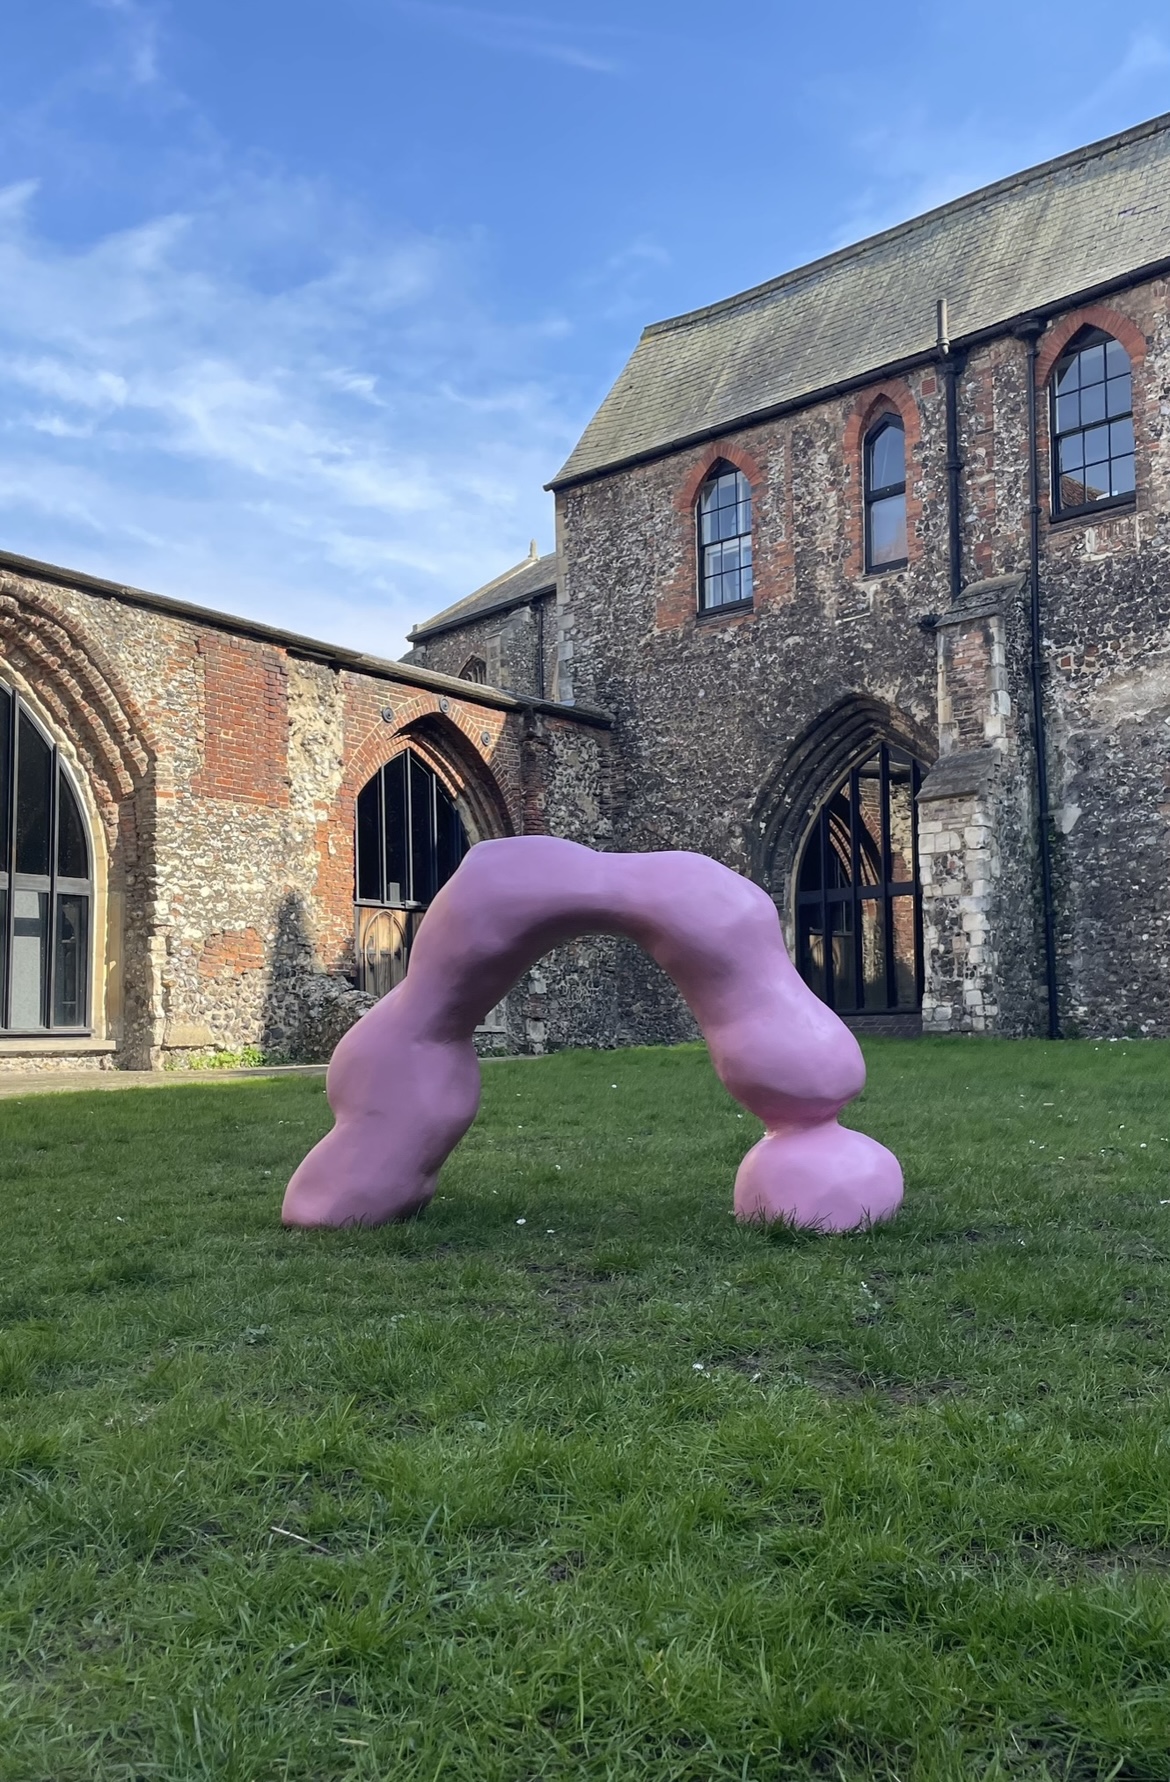 sculpture by Emily Bradford, showing a large scale pink sculpture outside.